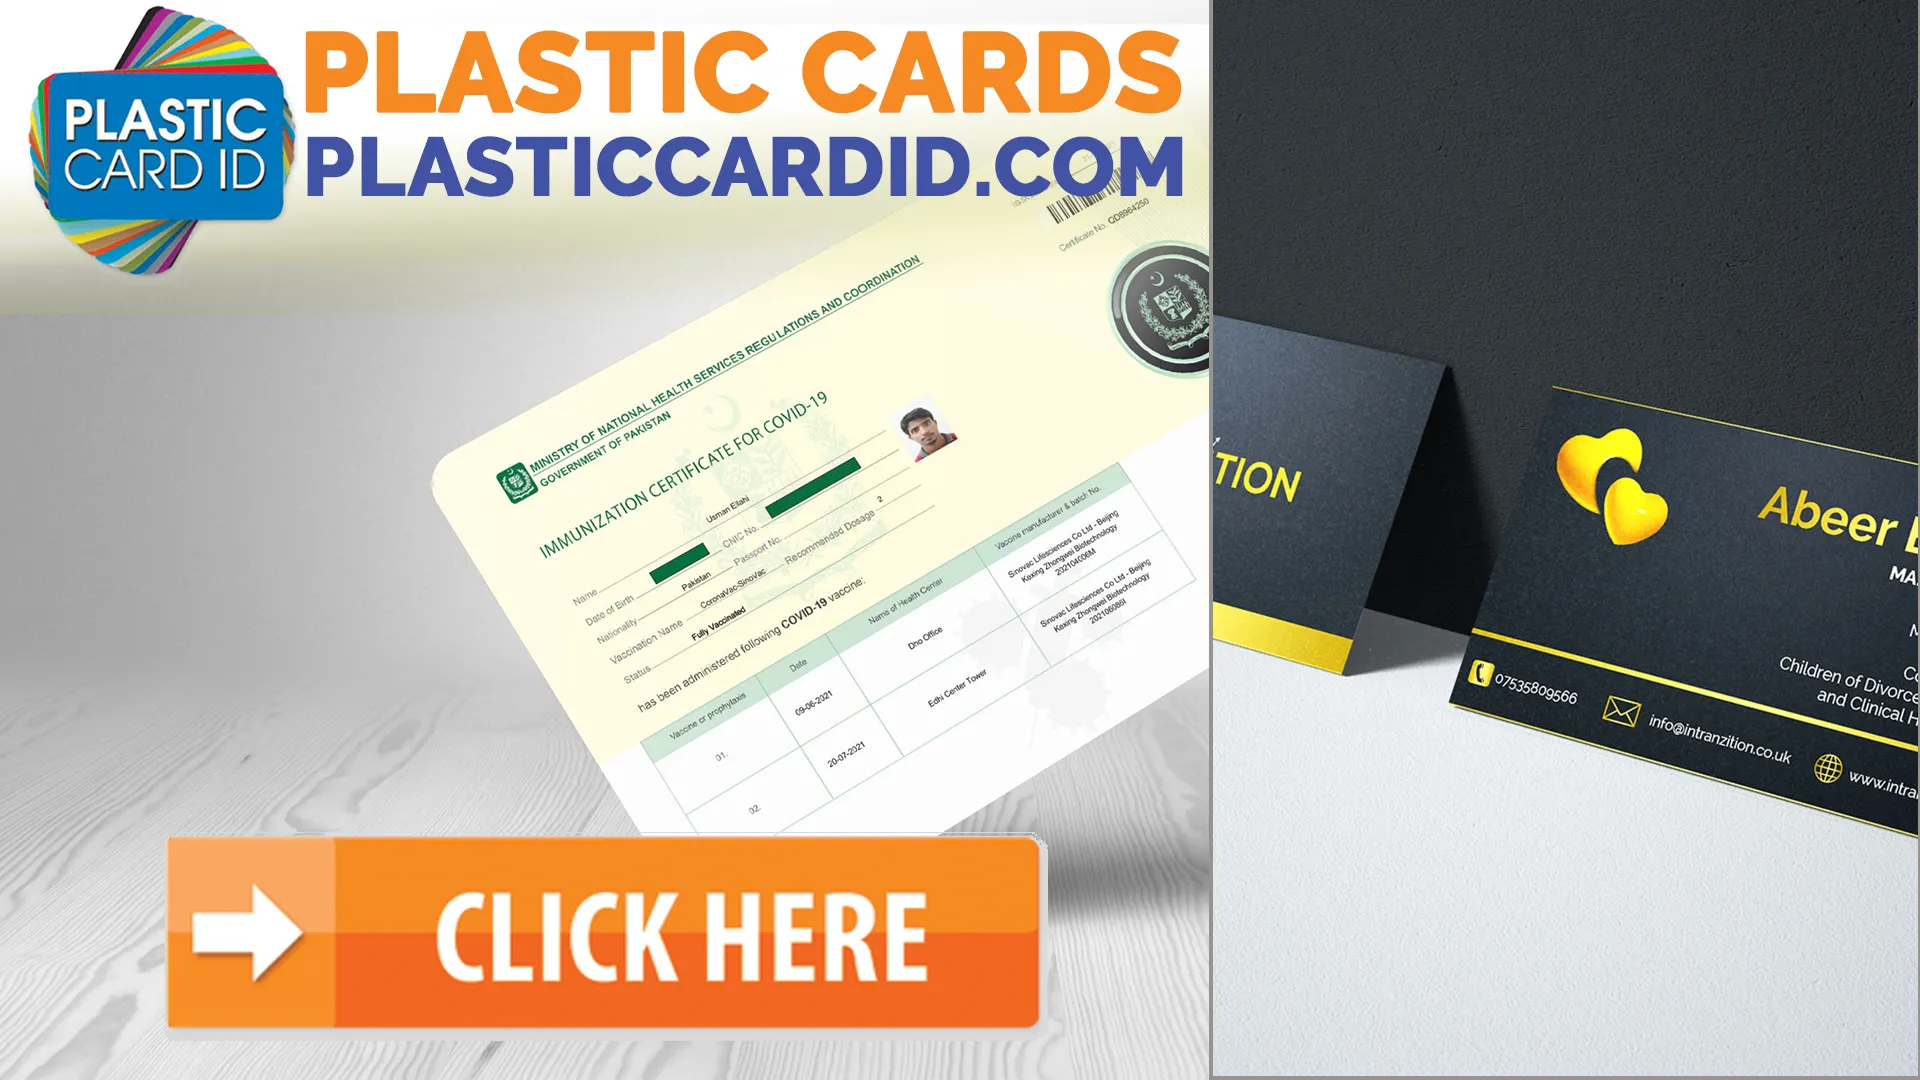 Expand Your Brand with Outstanding Cards